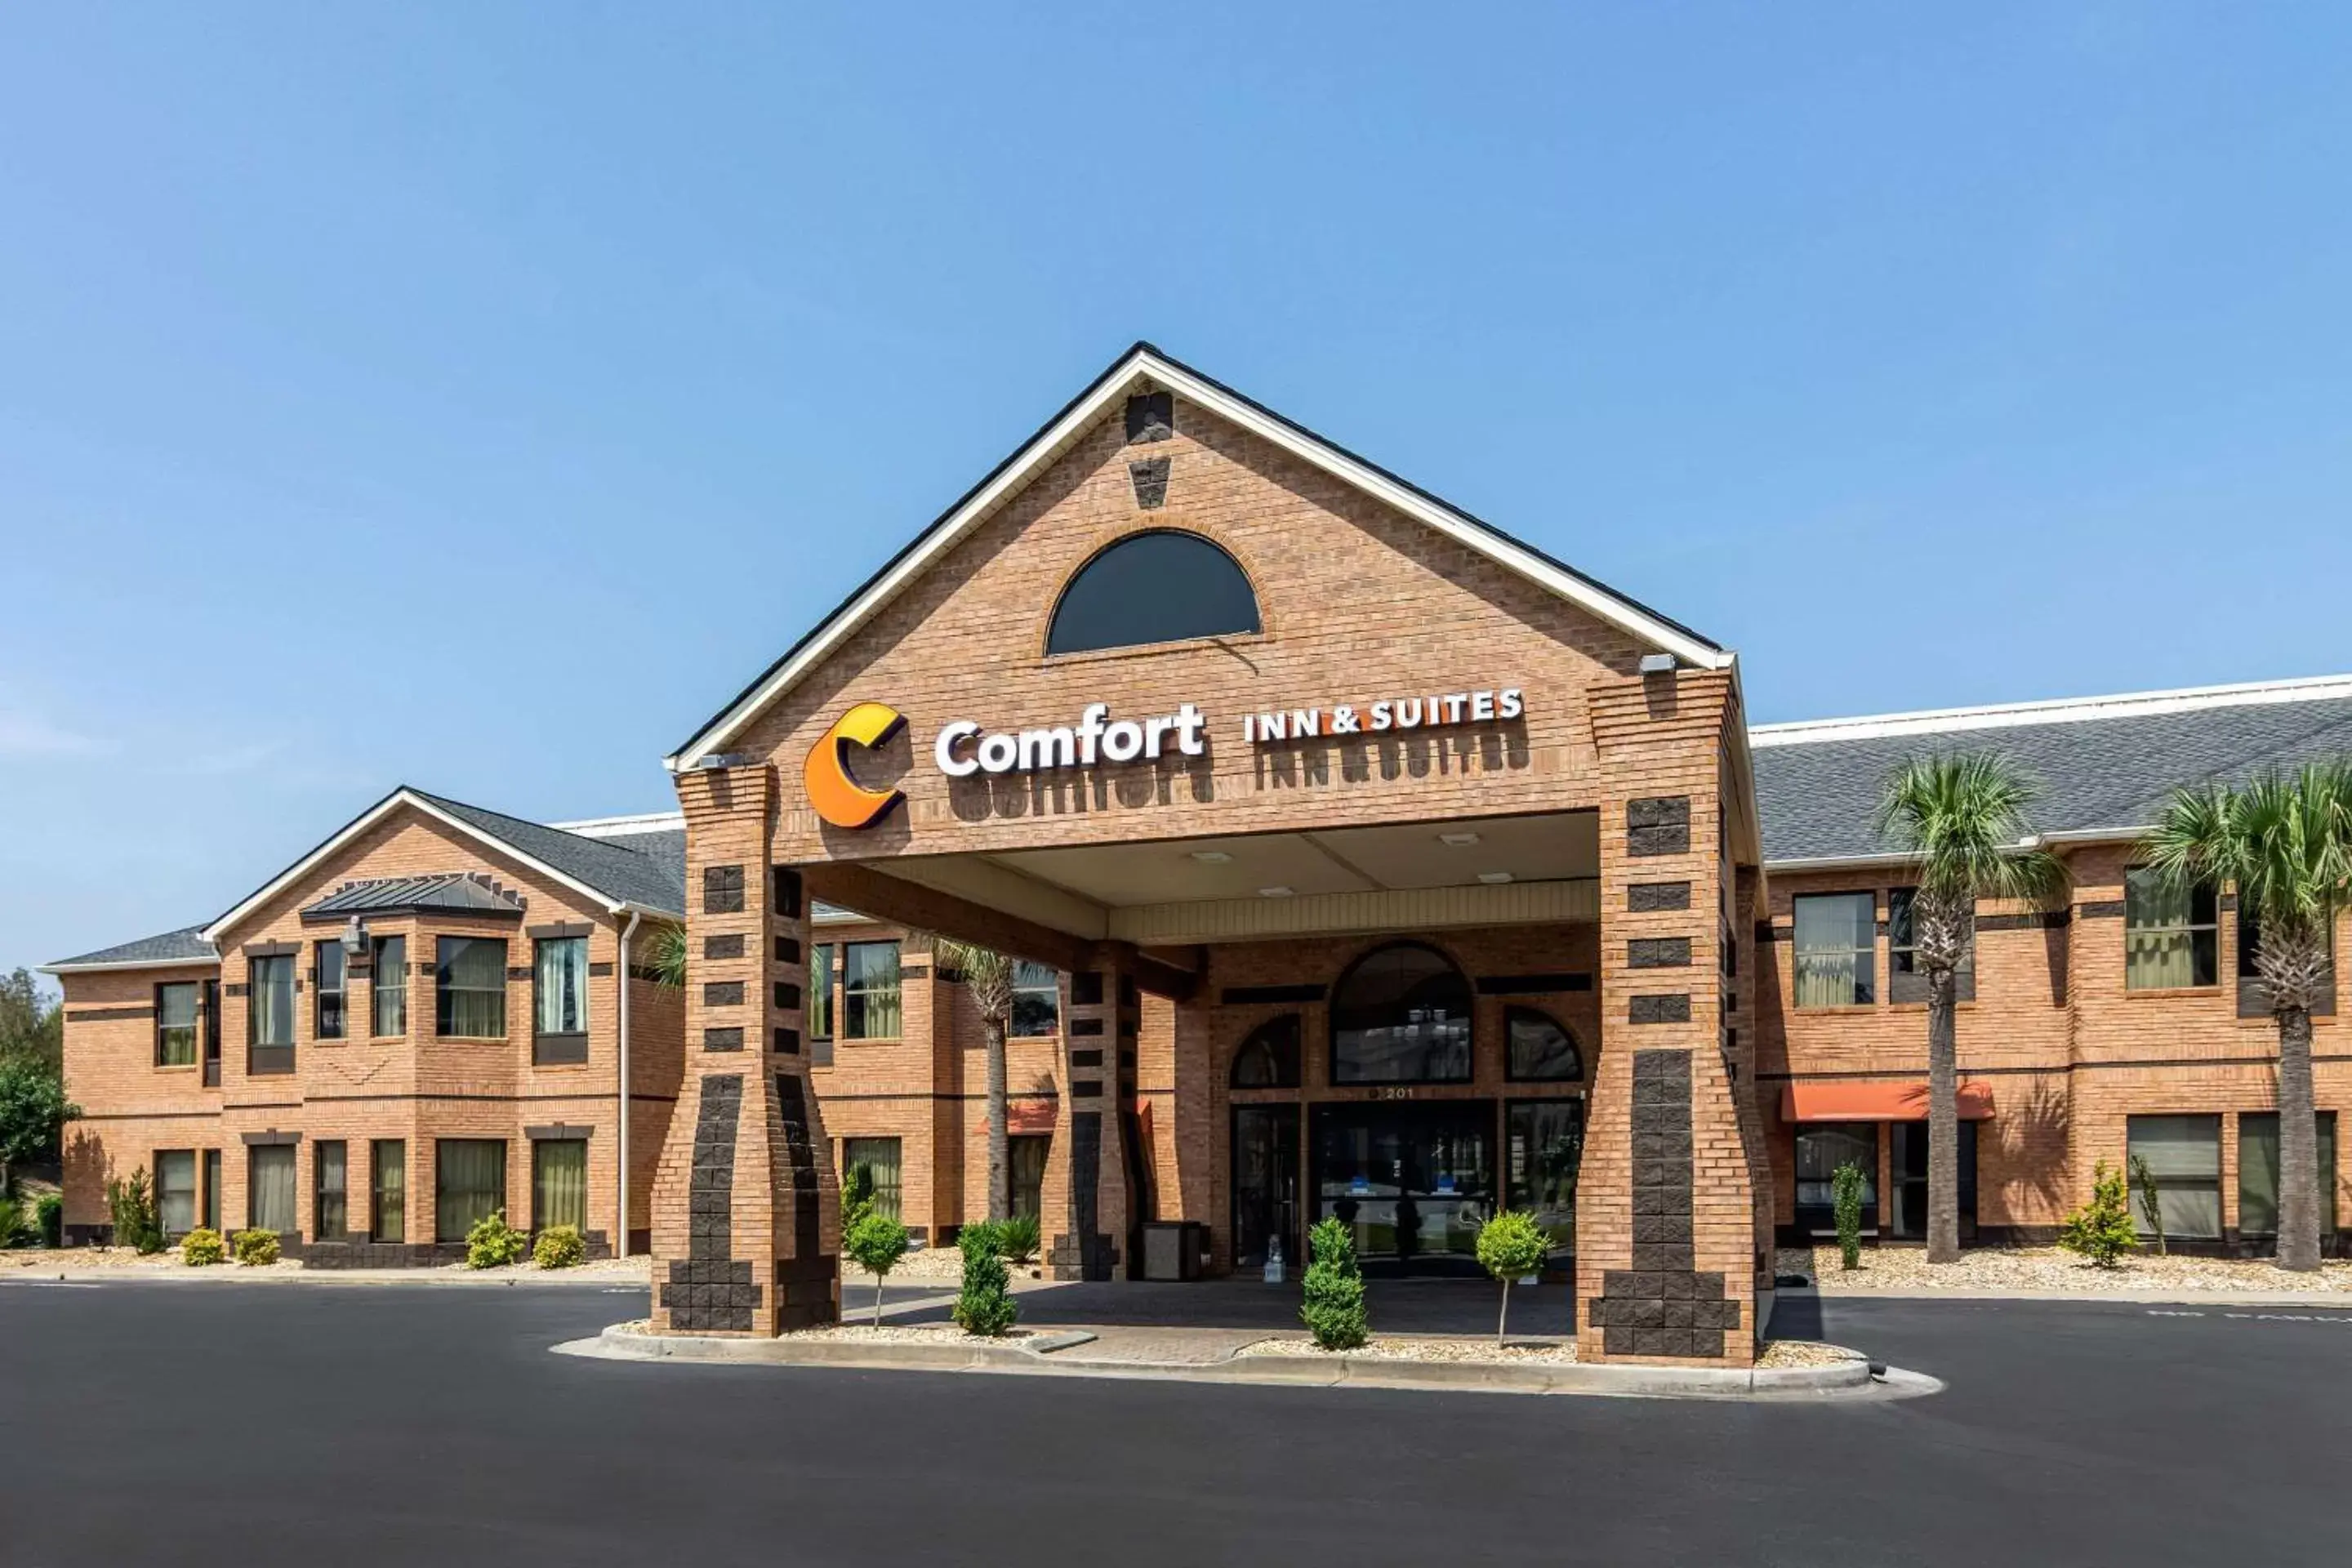 Property Building in Comfort Inn & Suites Perry National Fairgrounds Area